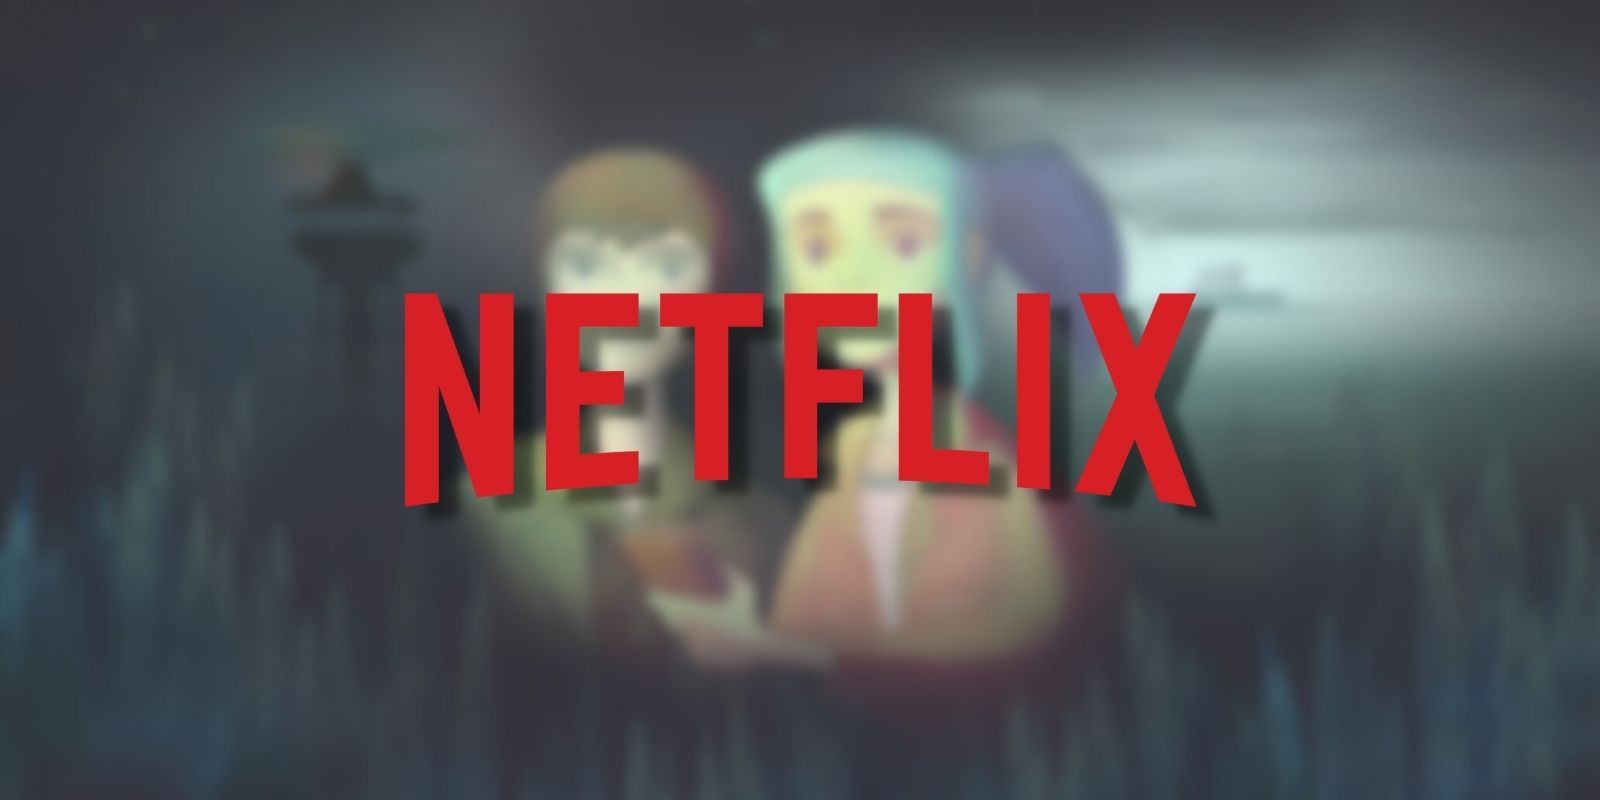 The Netflix logo over the key art for indie game Oxenfree